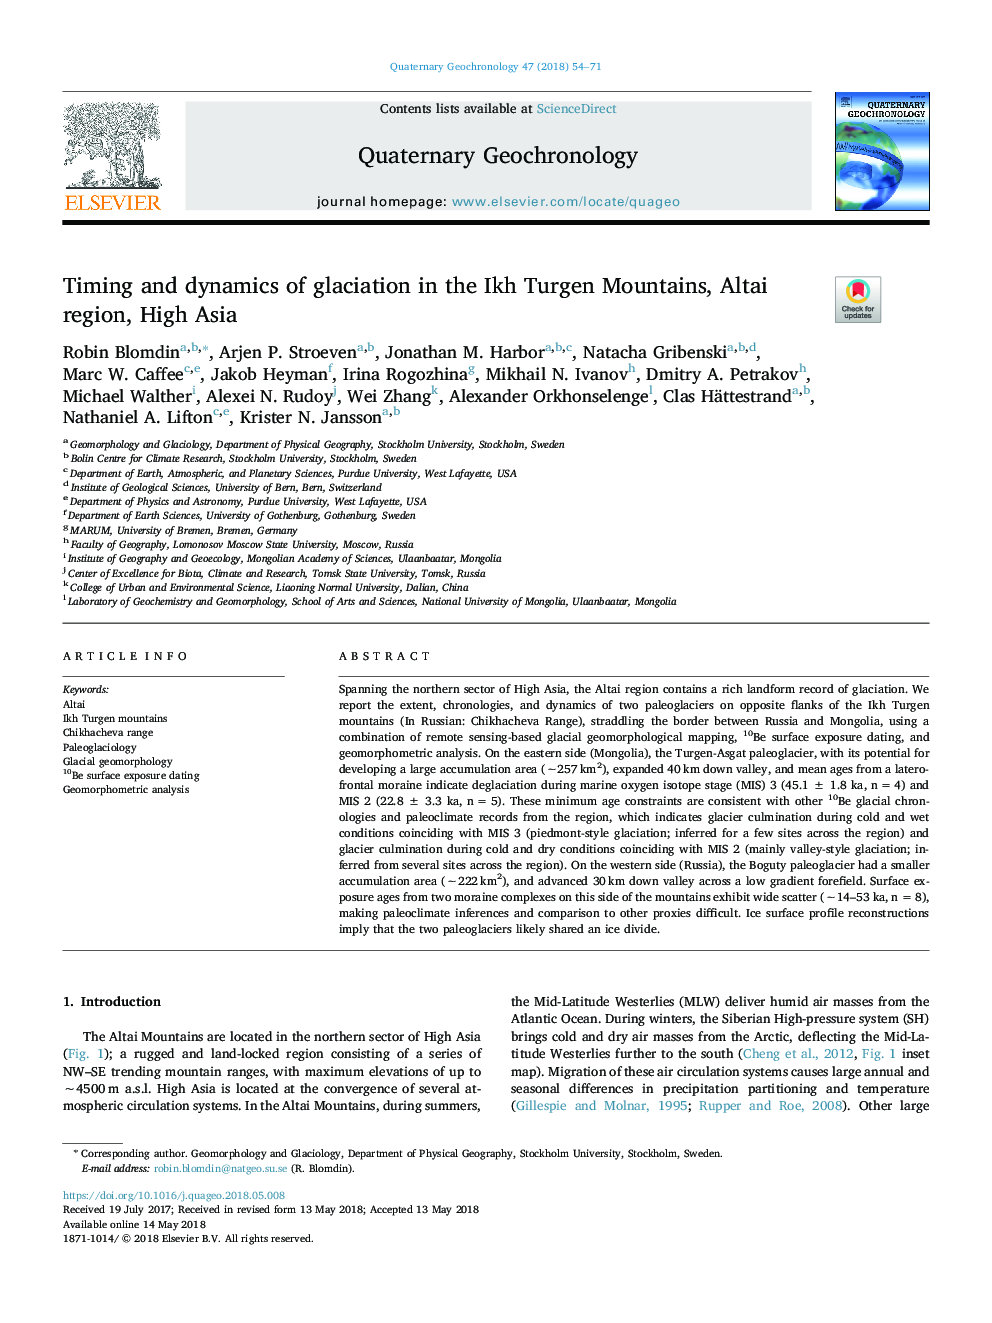 Timing and dynamics of glaciation in the Ikh Turgen Mountains, Altai region, High Asia